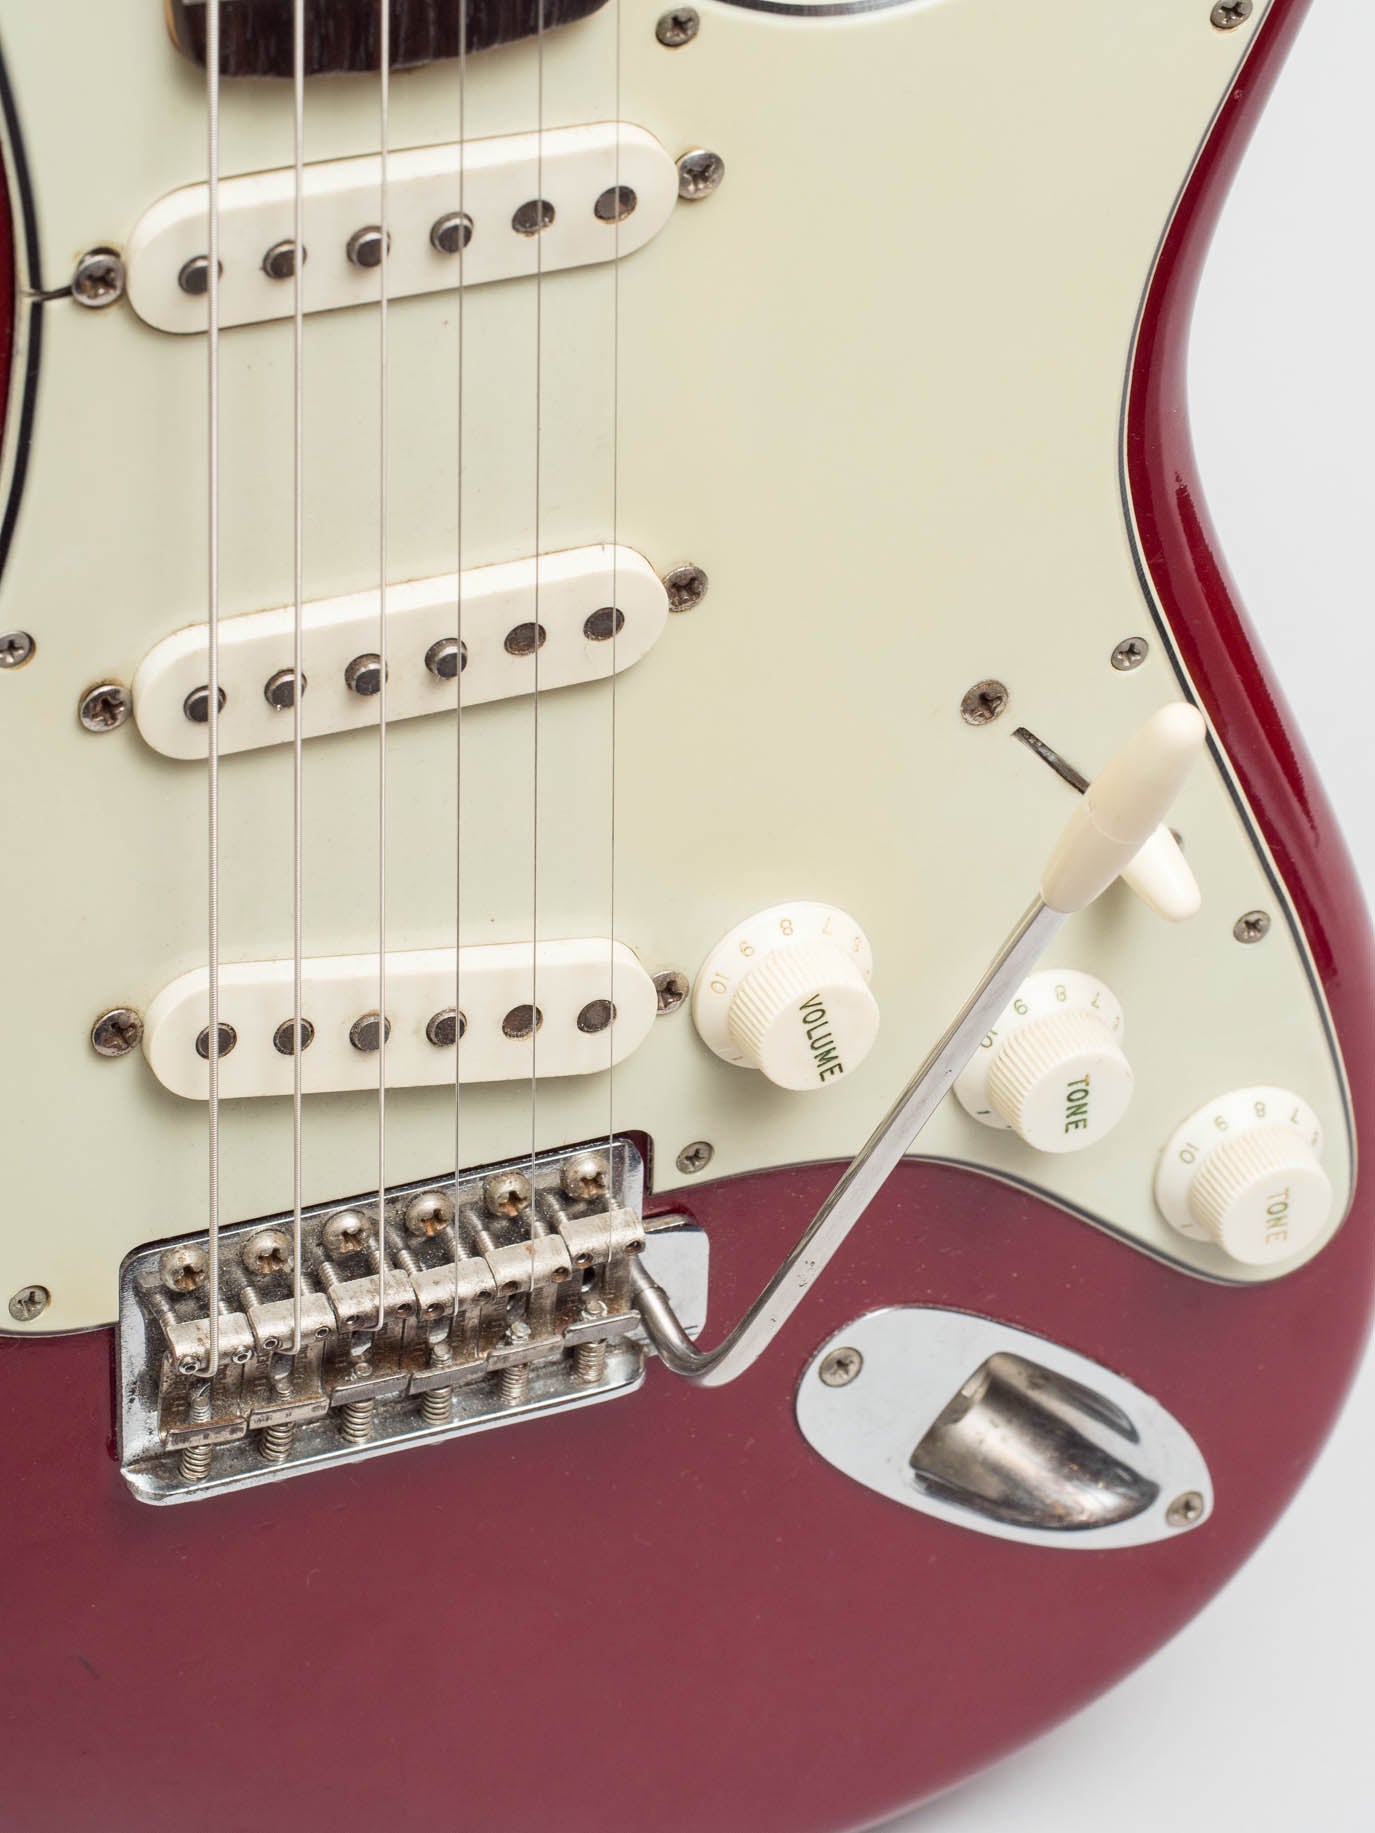 1963 Fender Stratocaster Candy Apple Red